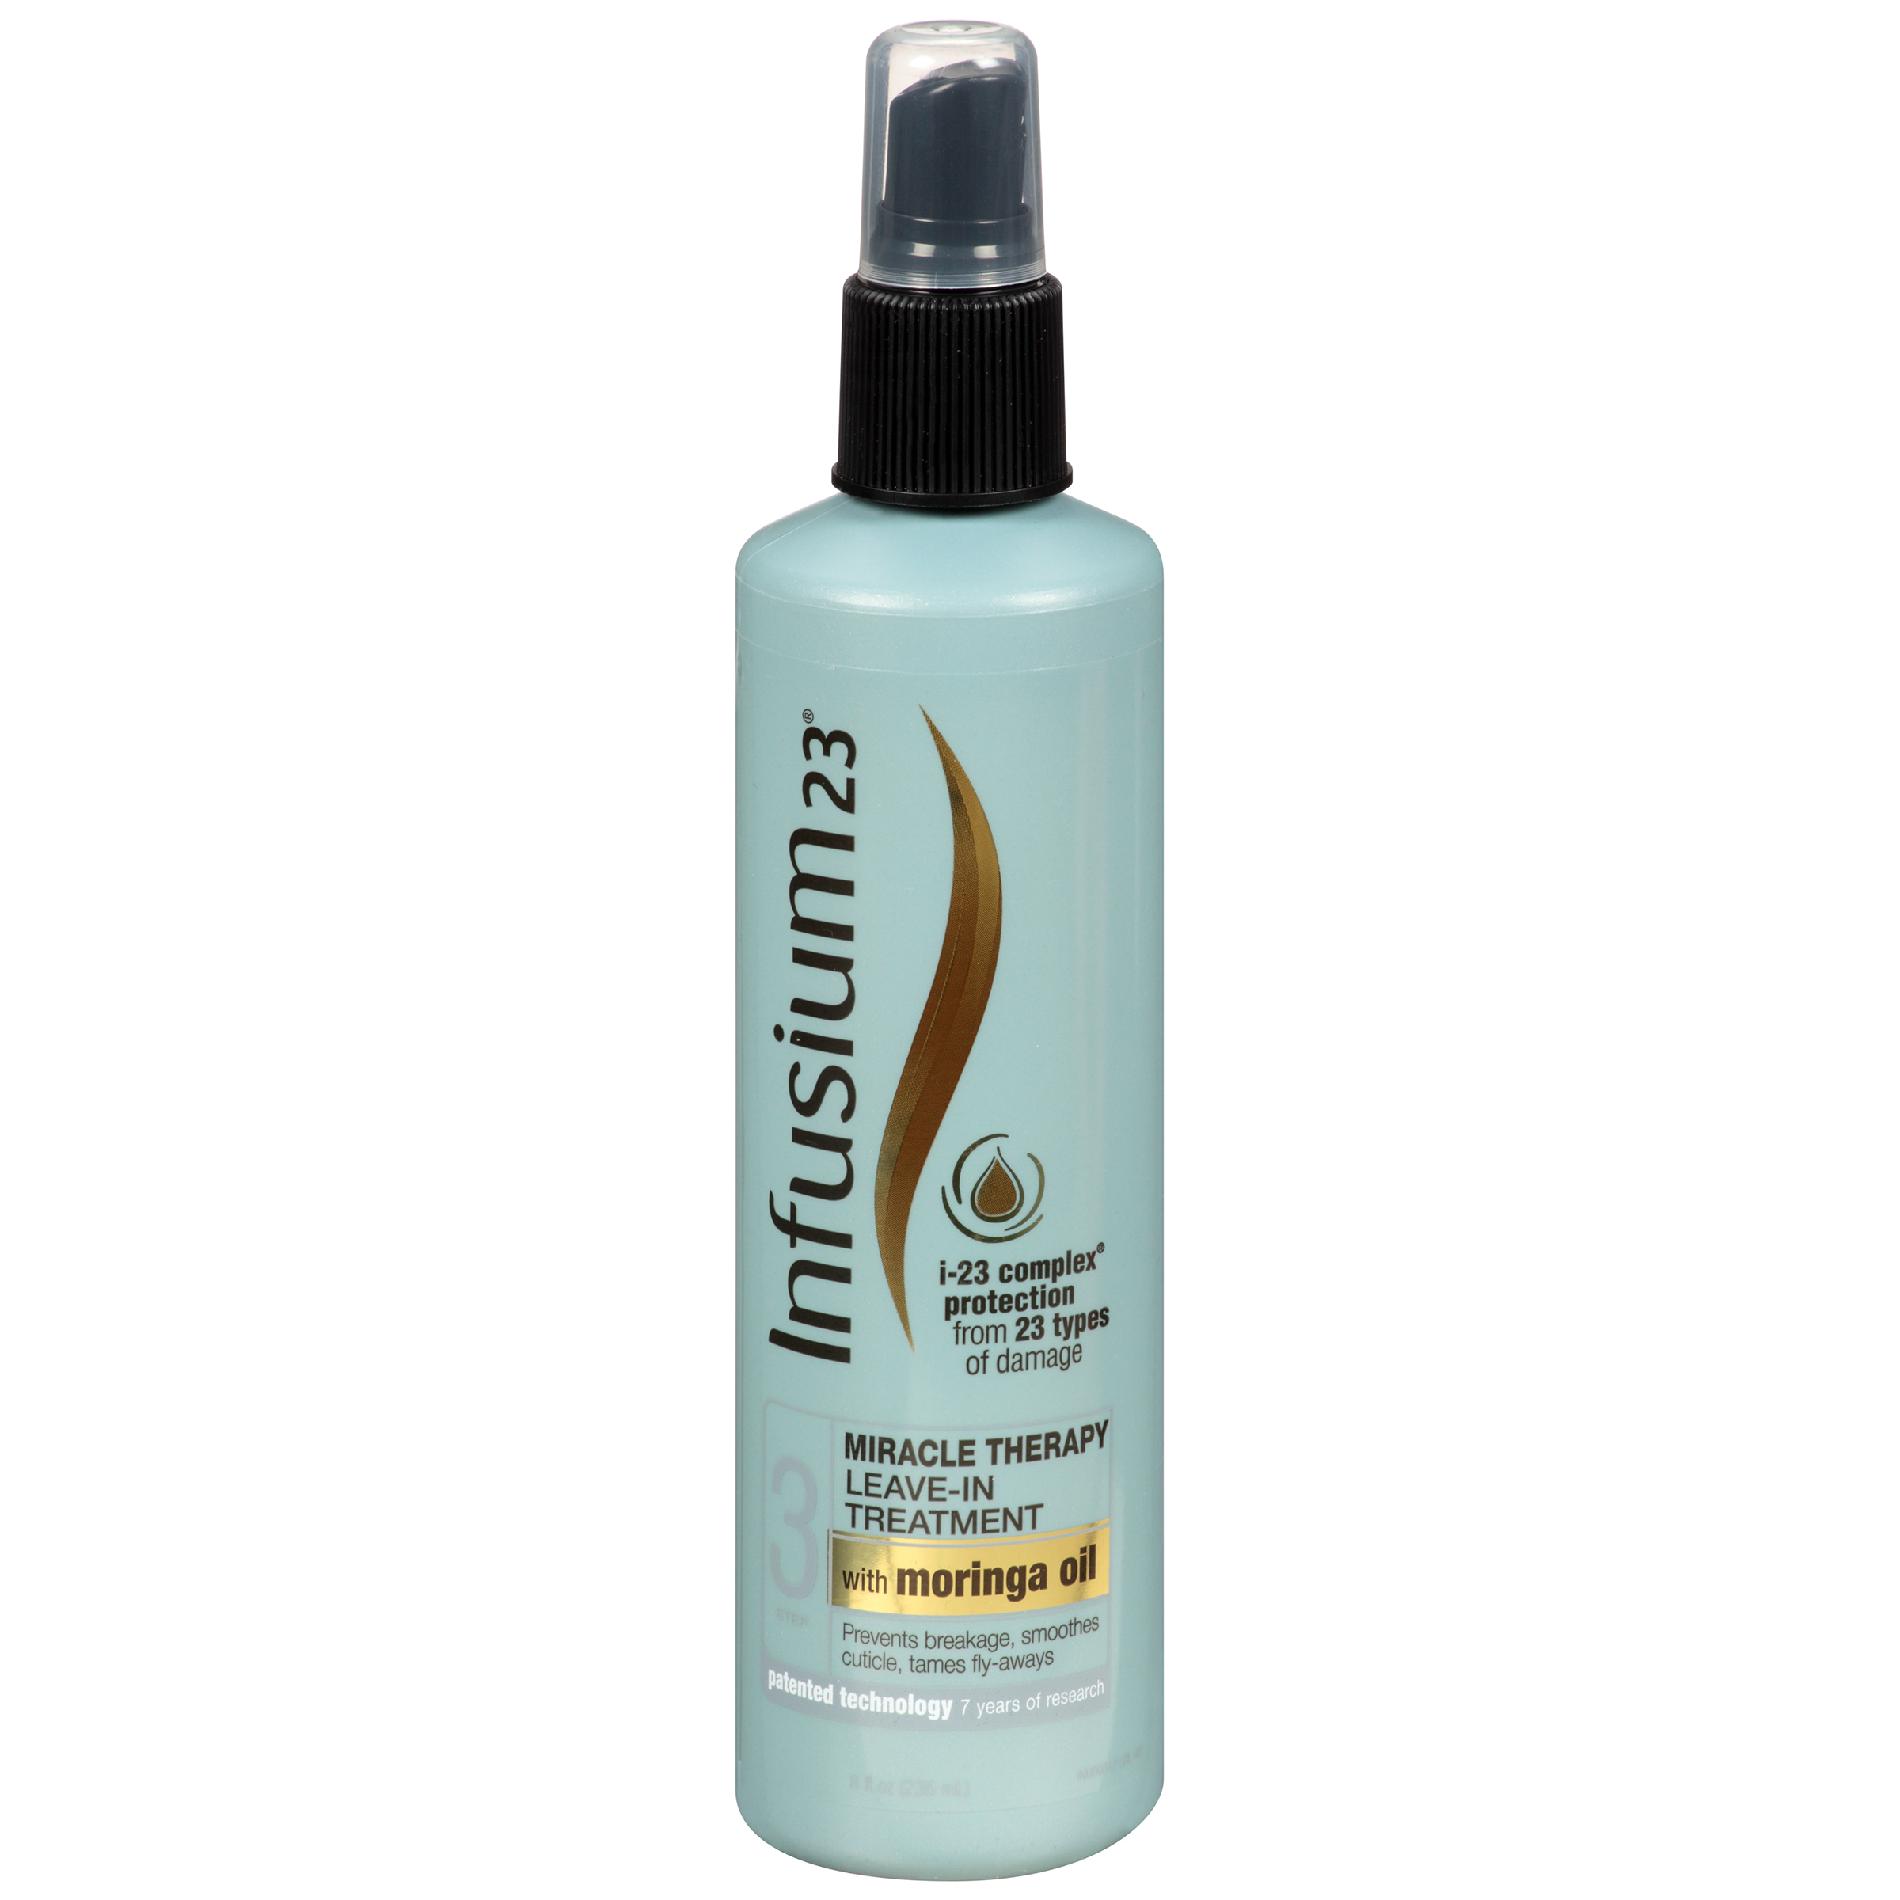 Infusium 23 Miracle Therapy Leave-in Treatment with Moringa Oil, 8.0 fl oz.